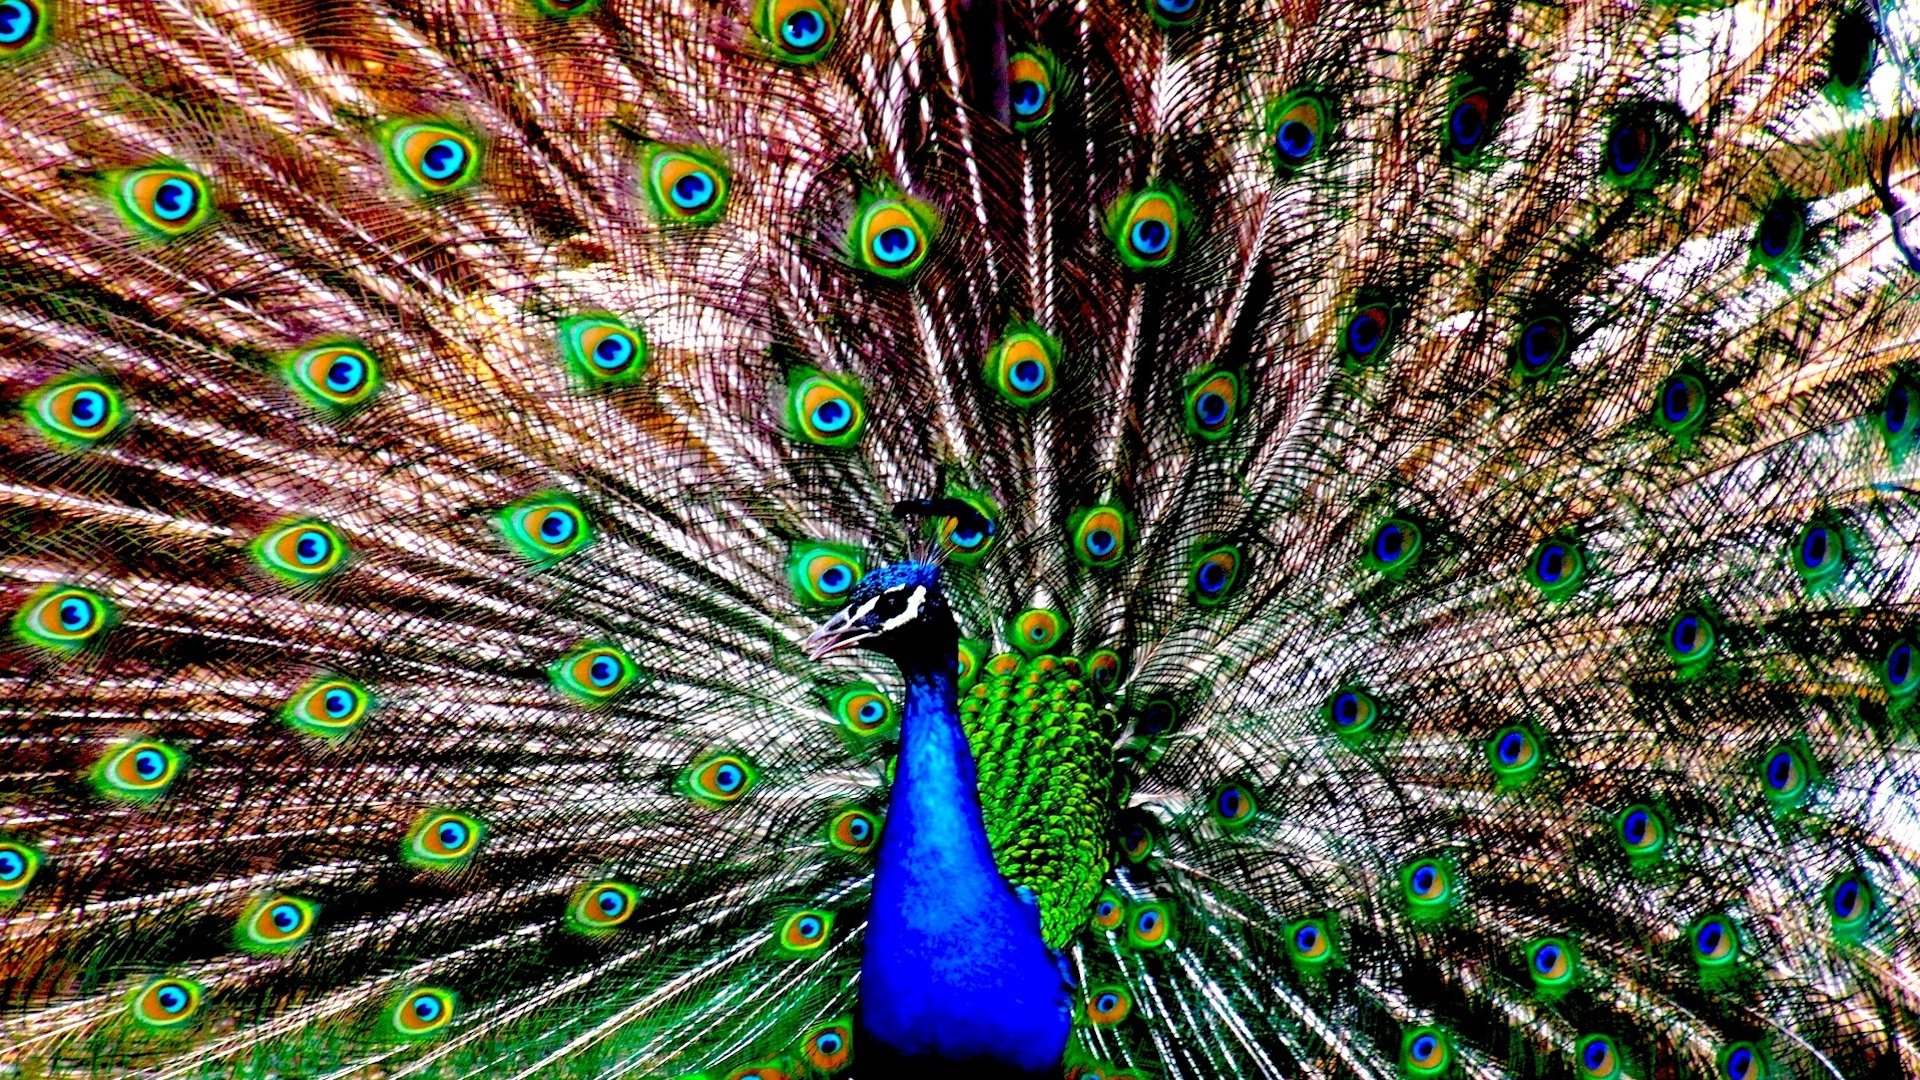 Peacock HD Wallpaper | Background Image | 1920x1080 | ID:361701